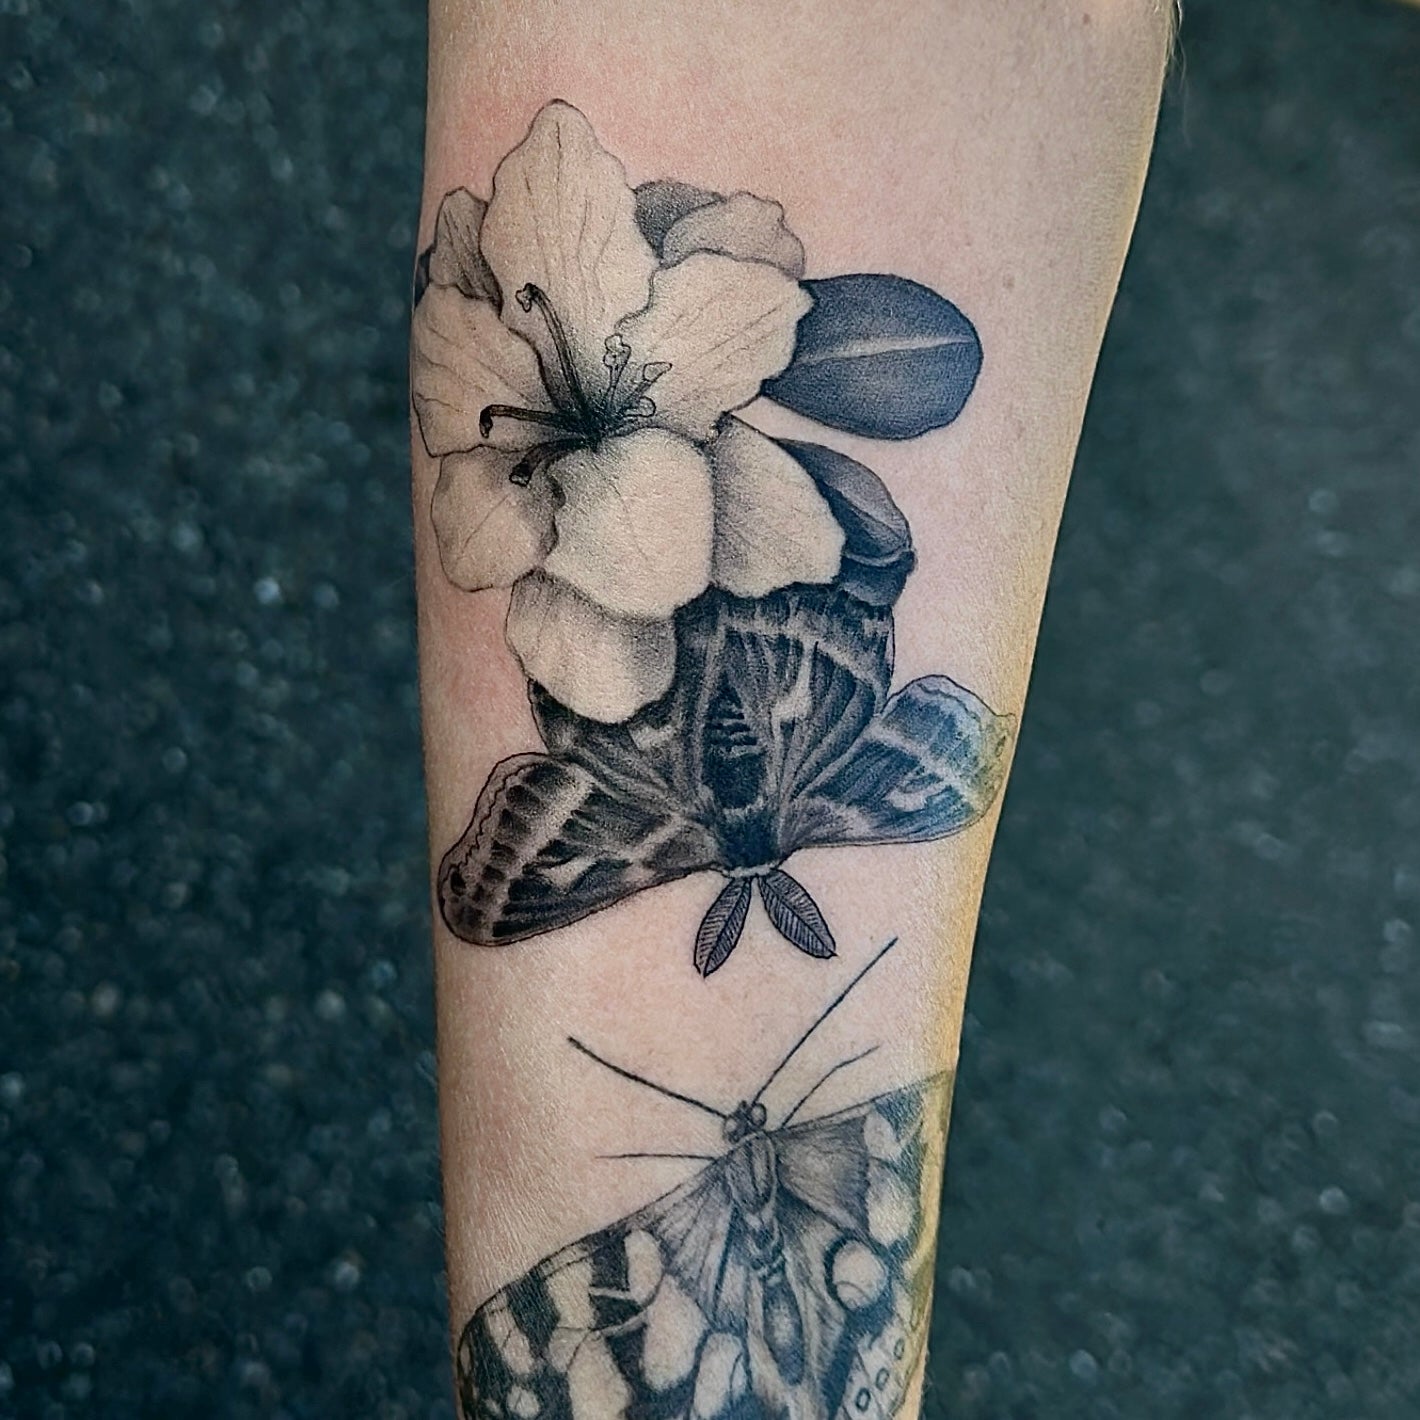 Moth and rhododendron realism tattoo by Danny Schreiber